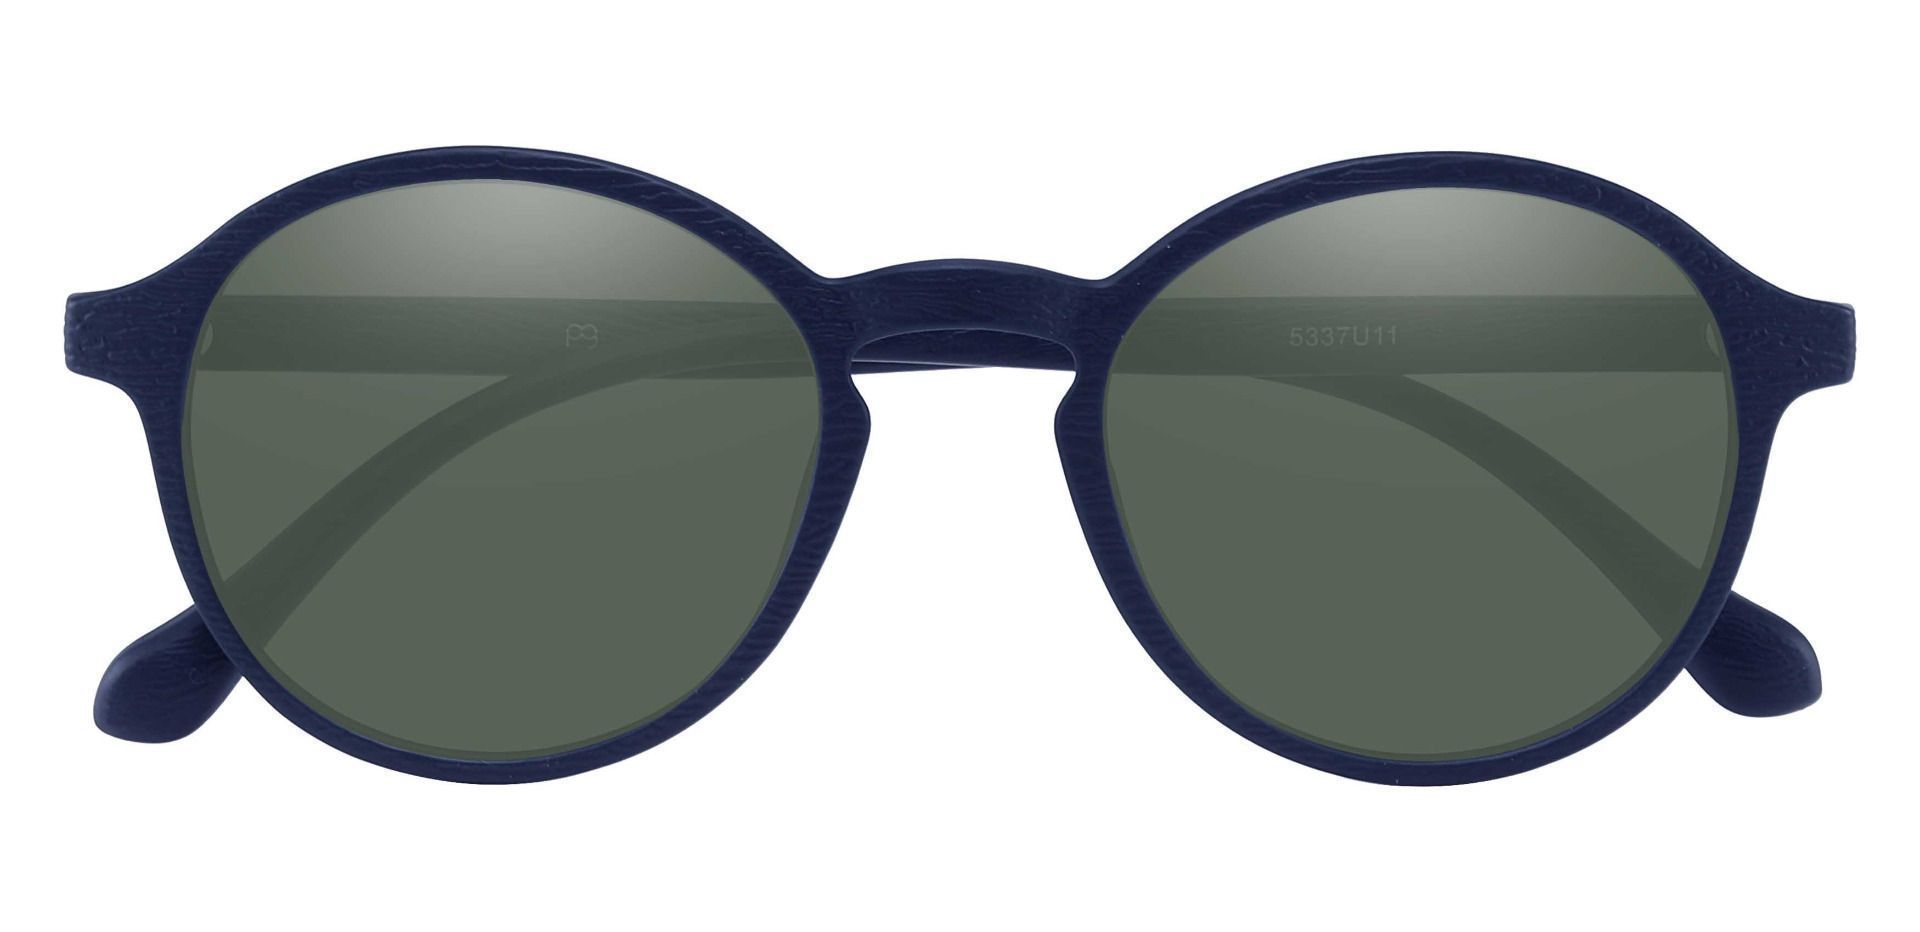 Whitney Round Lined Bifocal Sunglasses - Blue Frame With Green Lenses